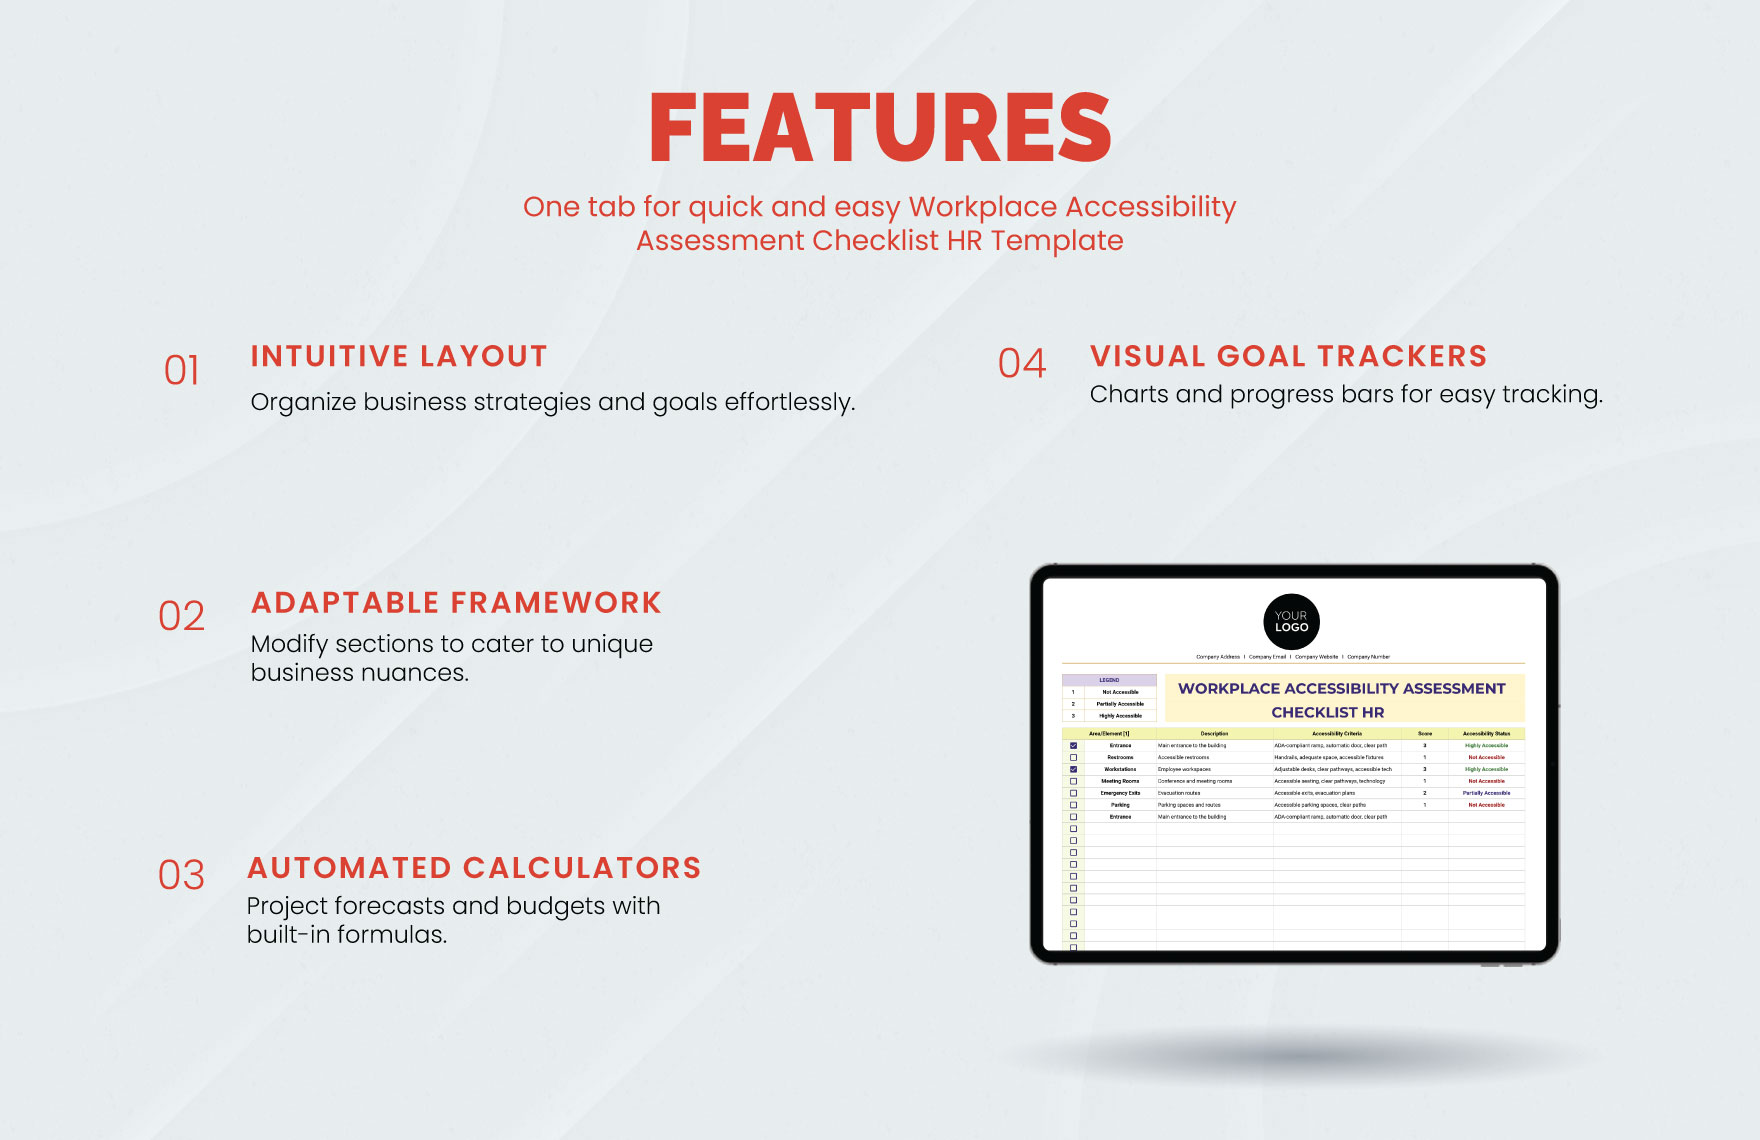 Workplace Accessibility Assessment Checklist HR Template